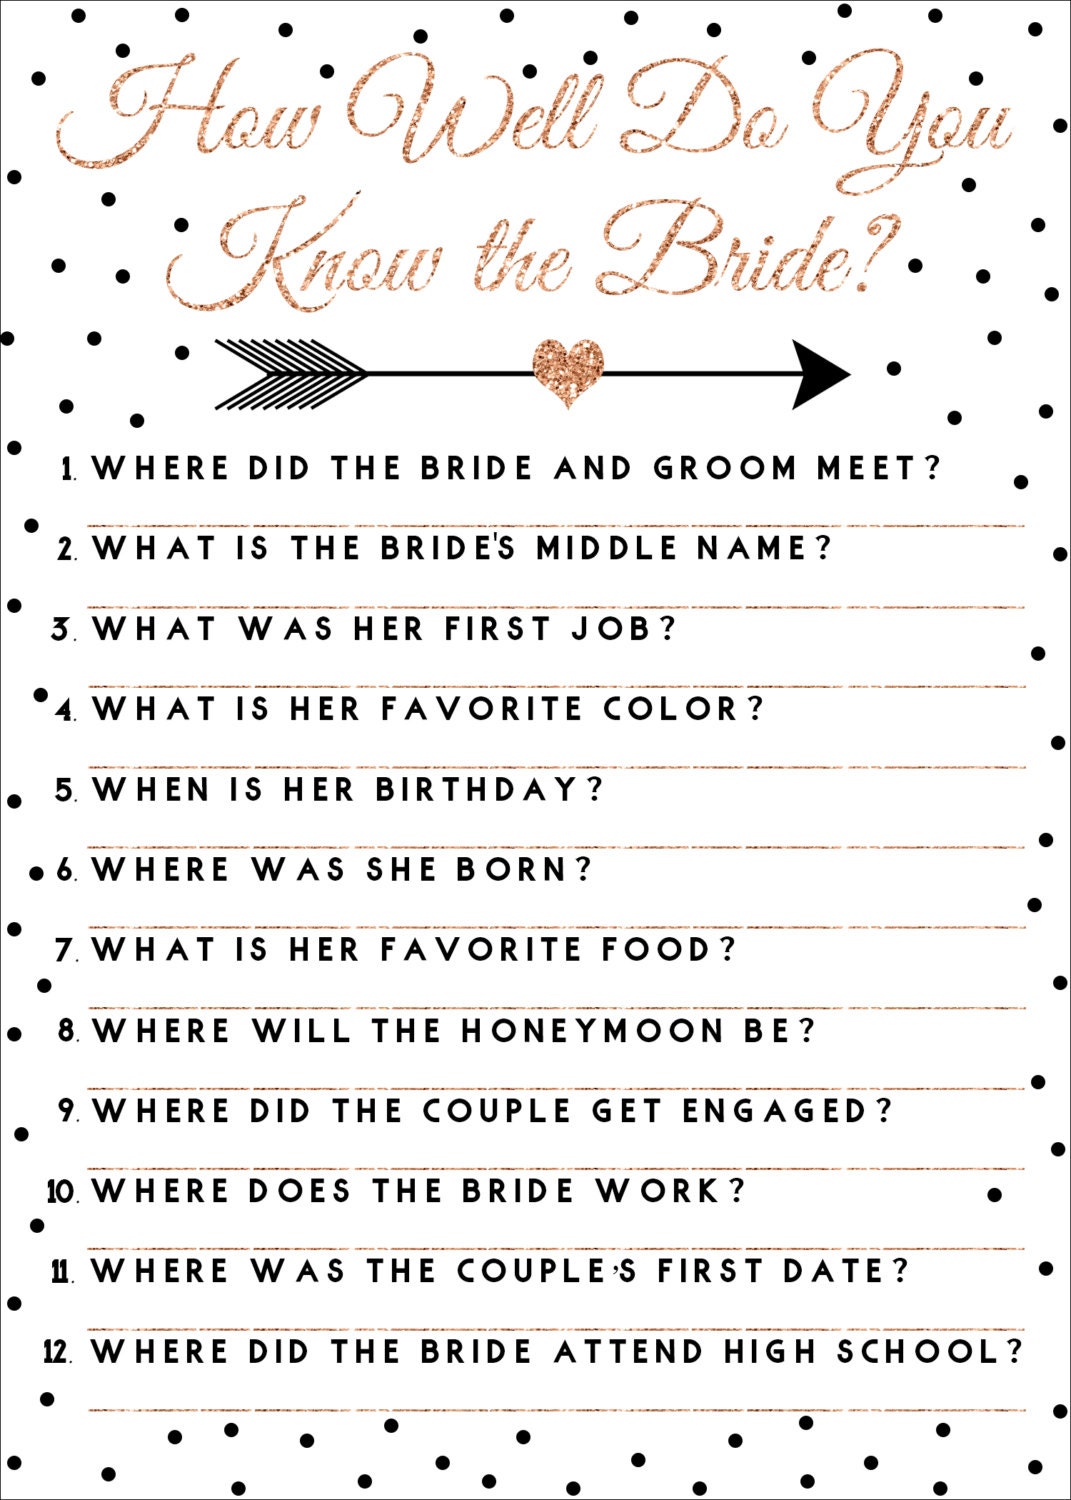 How Well Do You Know the Bride Bridal Shower Game Printable | Etsy